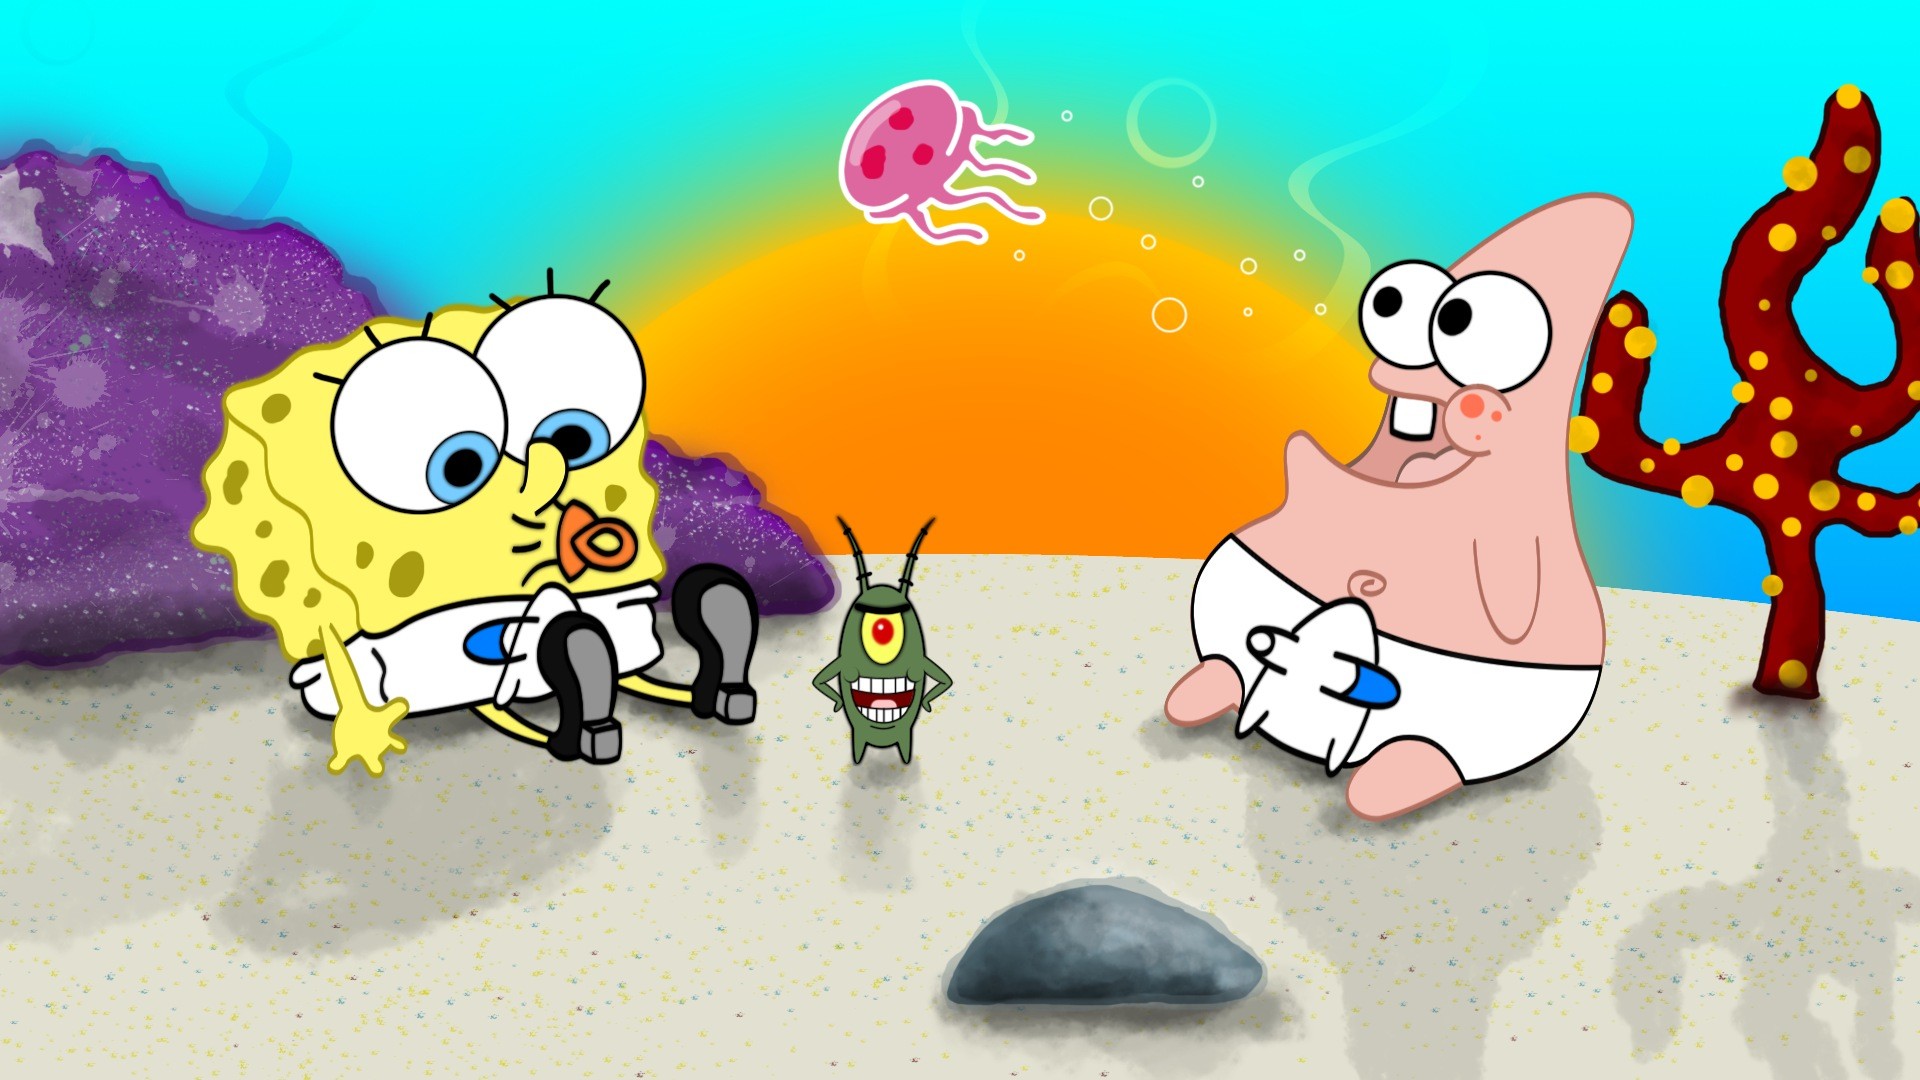 1920x1080 Spongebob and Patrick Star Wallpapers , here you can see Spongebob